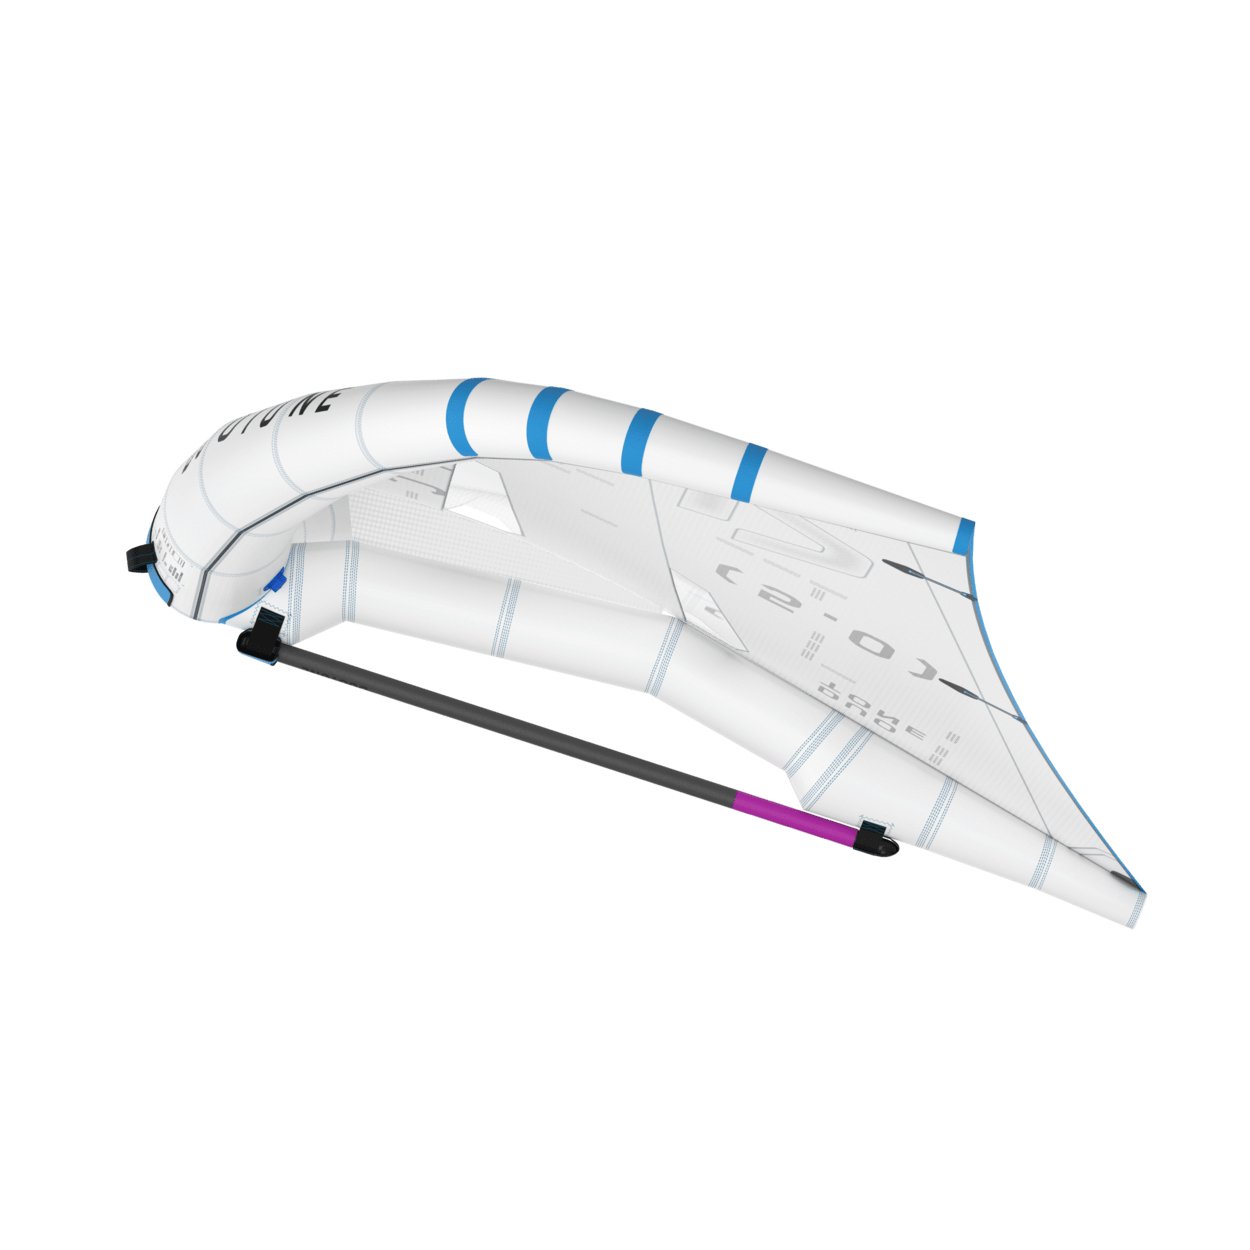 Duotone Slick Concept Blue 2024 - Worthing Watersports - 9010583198941 - Wings - Duotone X